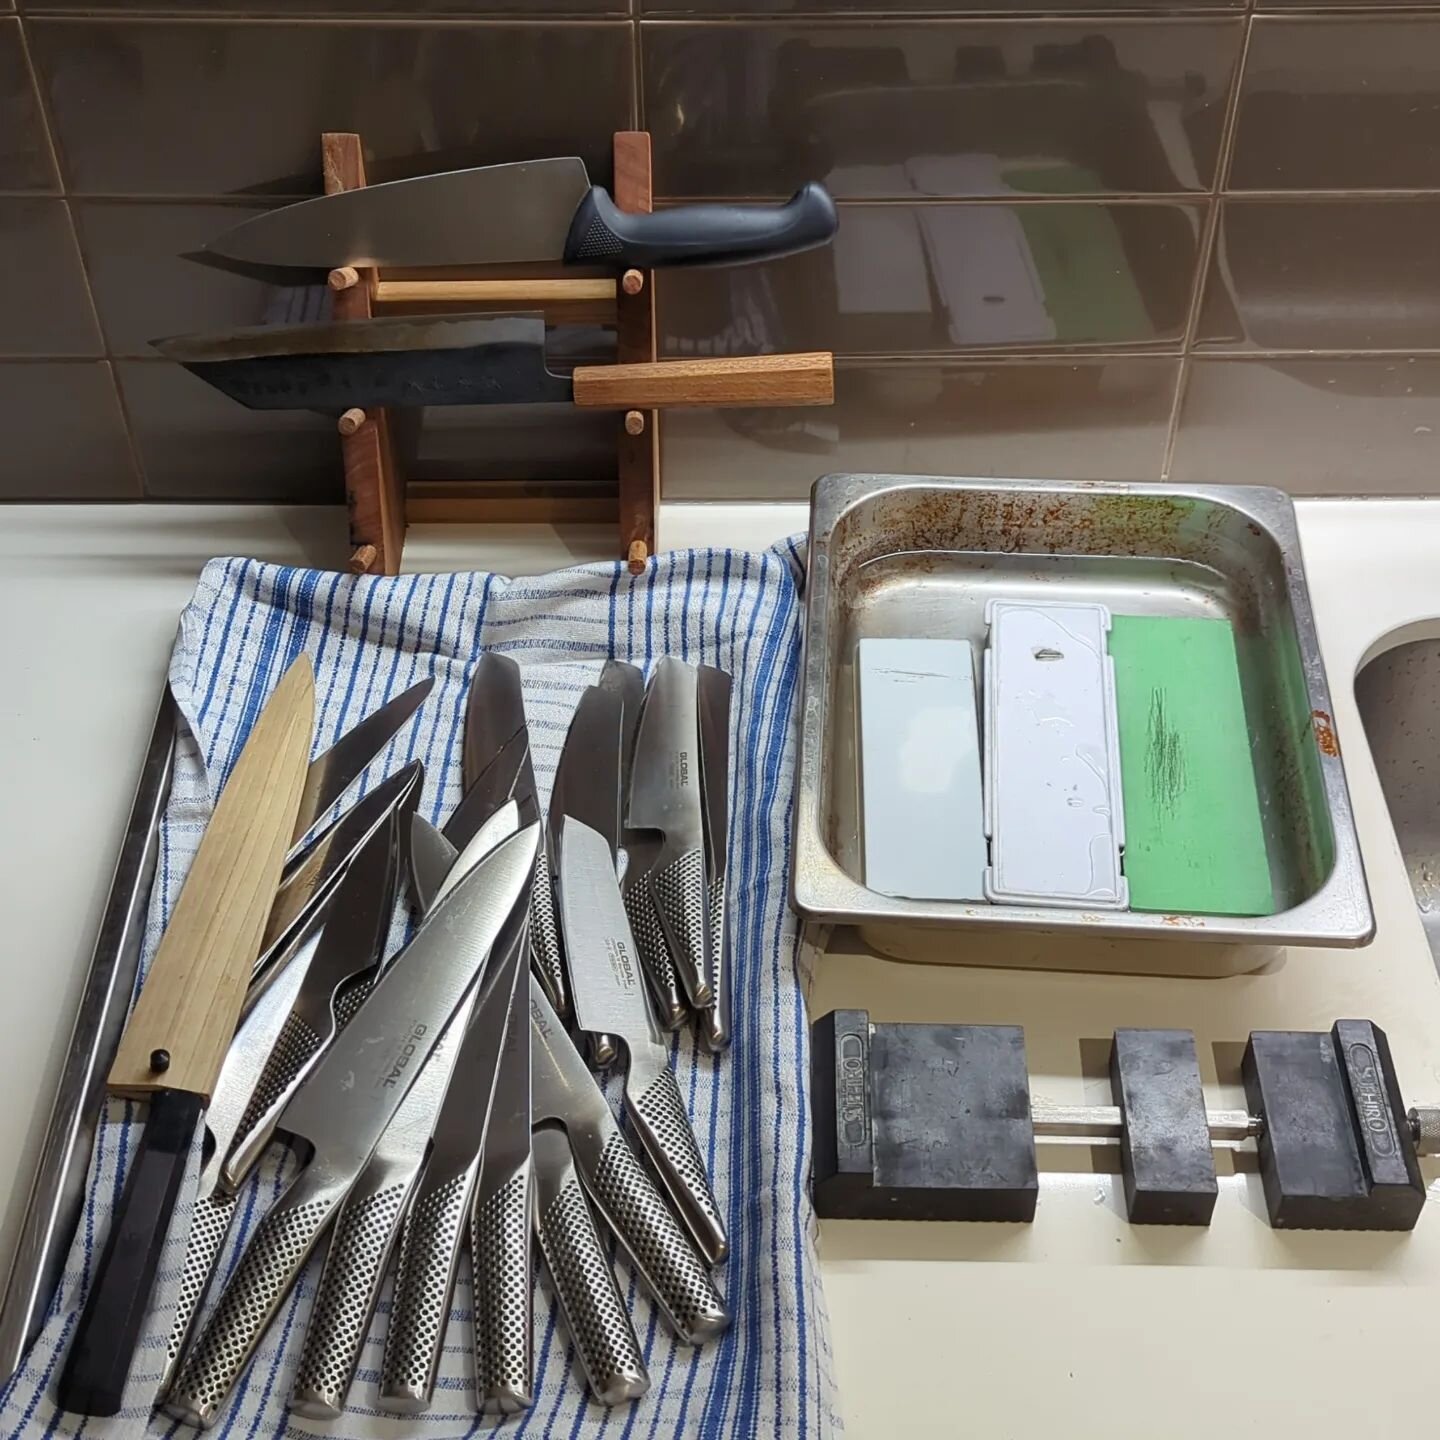 This is what scheduled maintenance looks like for Lumiere. Sharp knives are a must whether you're a home cook or a professional chef. Learn how and techniques to make the most of your knives and produce with our Saturday lunch sharpening class.